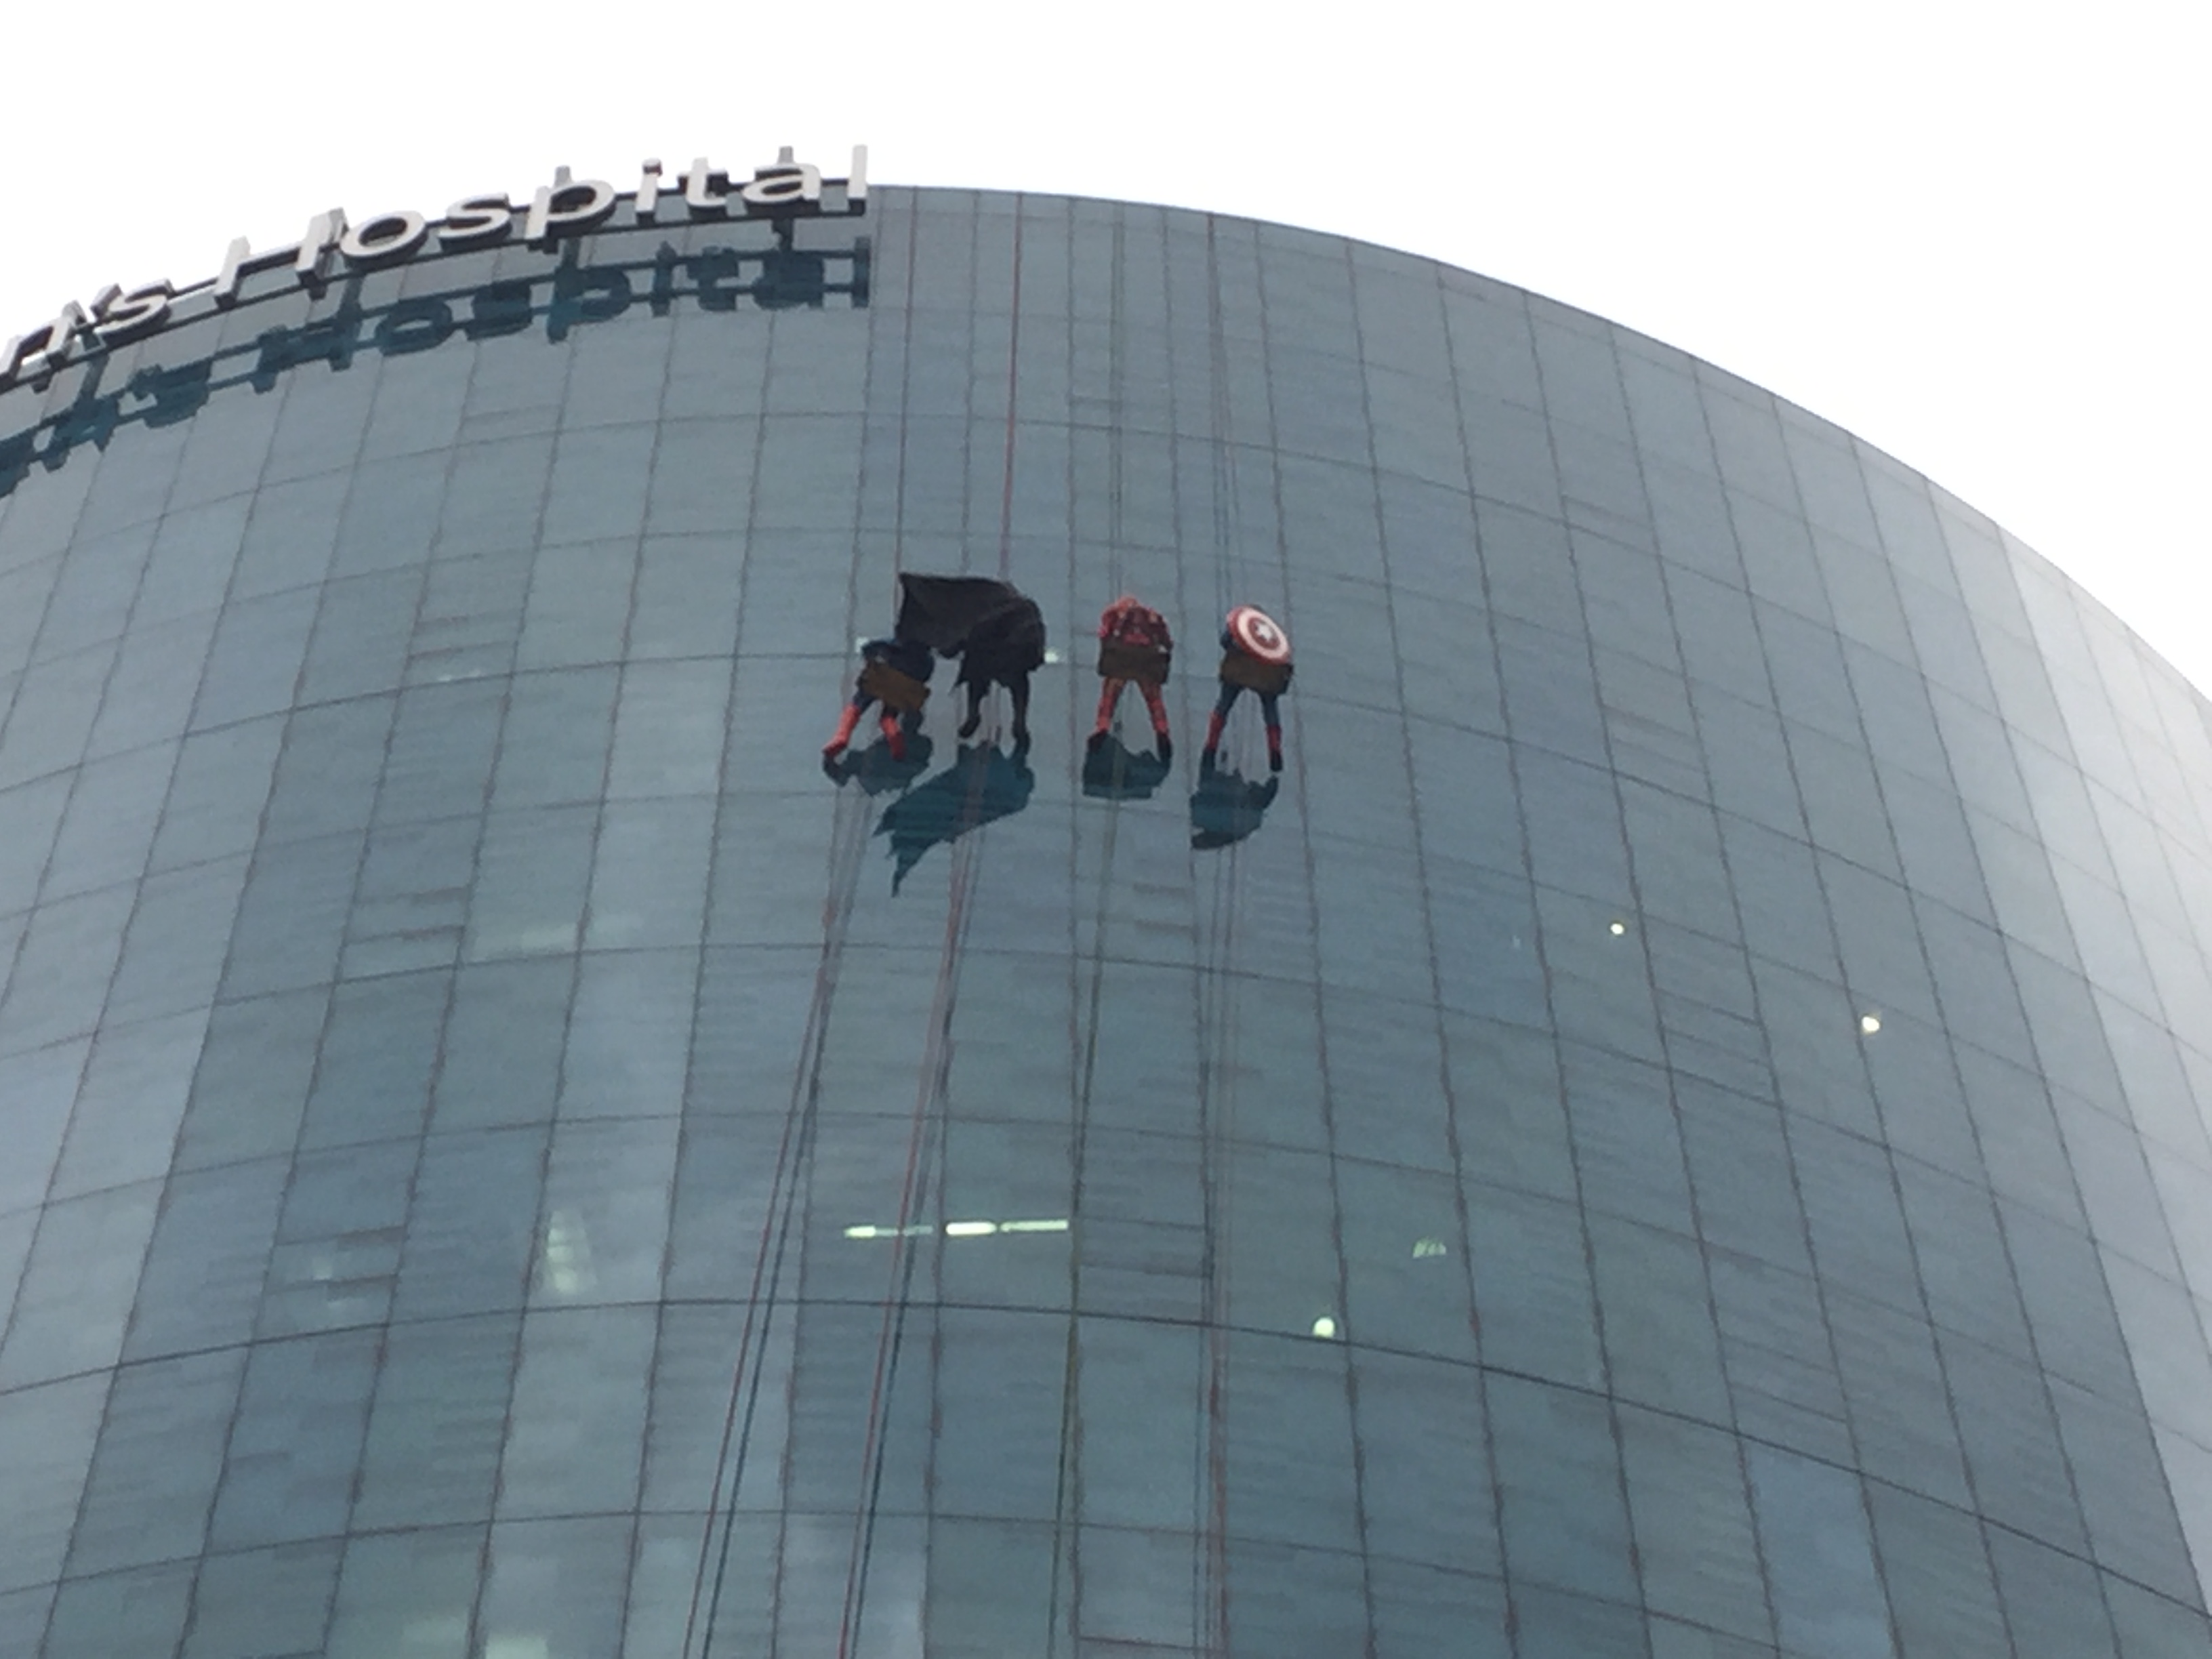 Window washers dressed as superheroes rappel down the side of the Helen Devos Children's Hospital to wave at children on Halloween